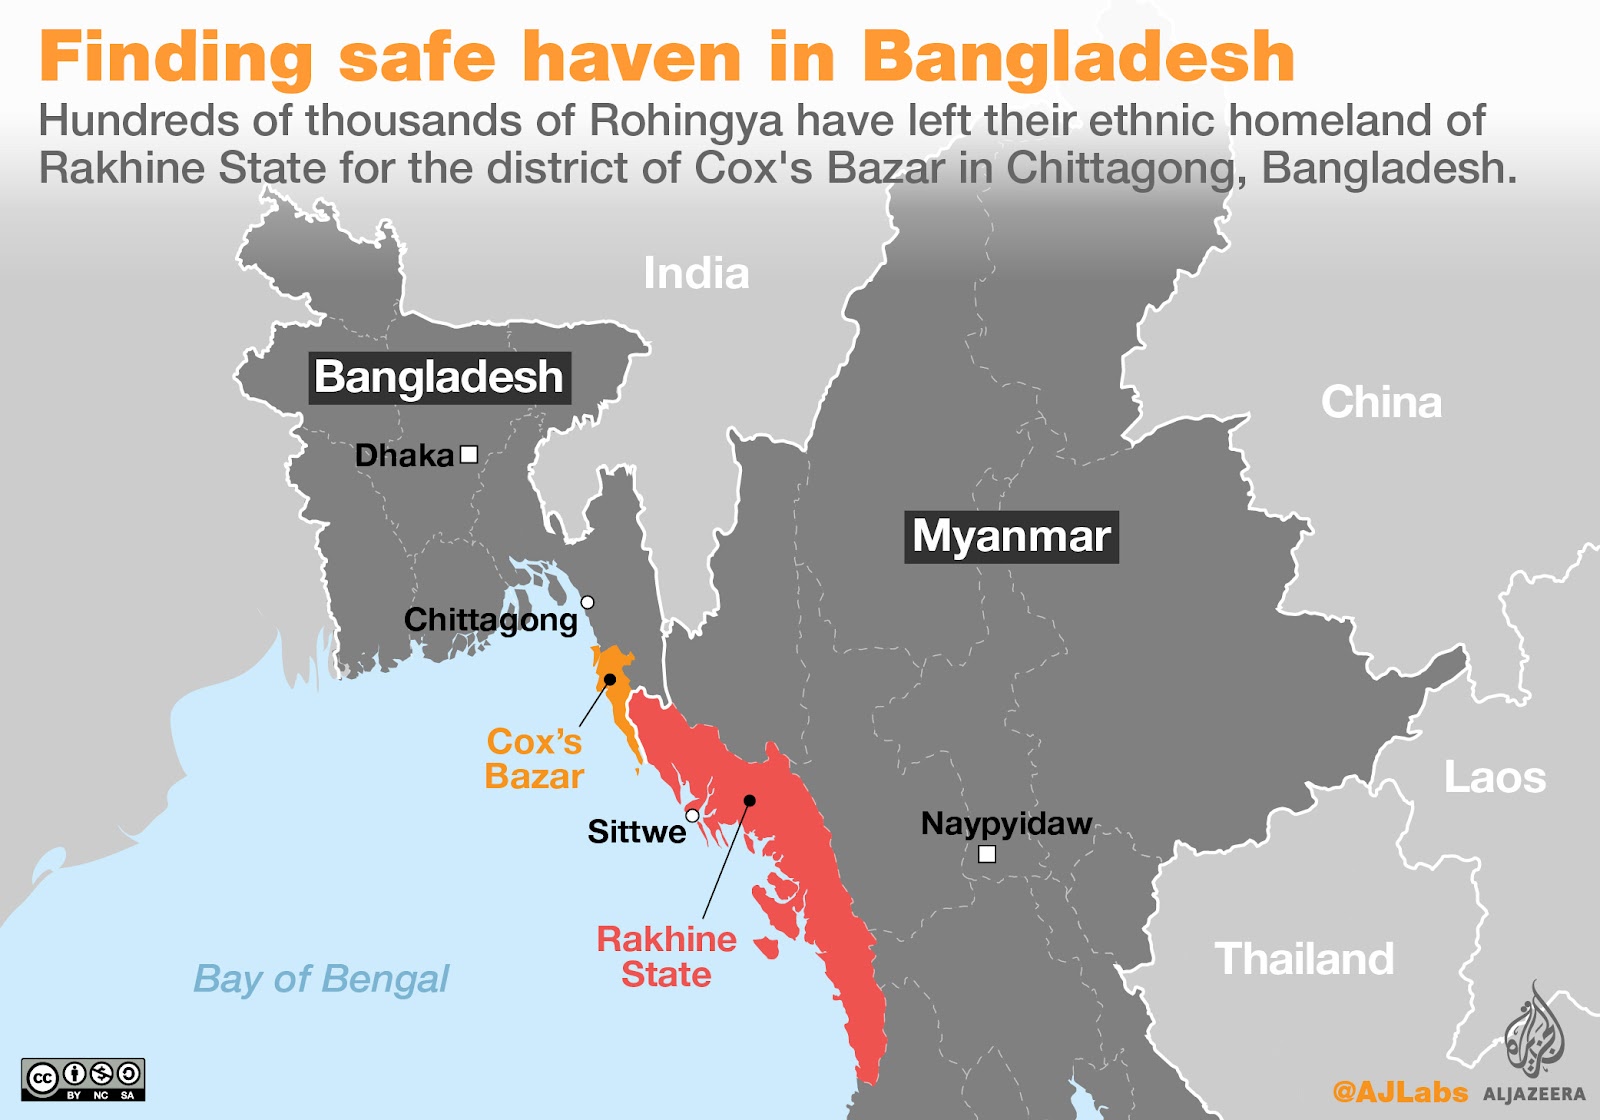 Bangladesh and Myanmar on a map showing Cox's Bazar and Rakhine state respectively.